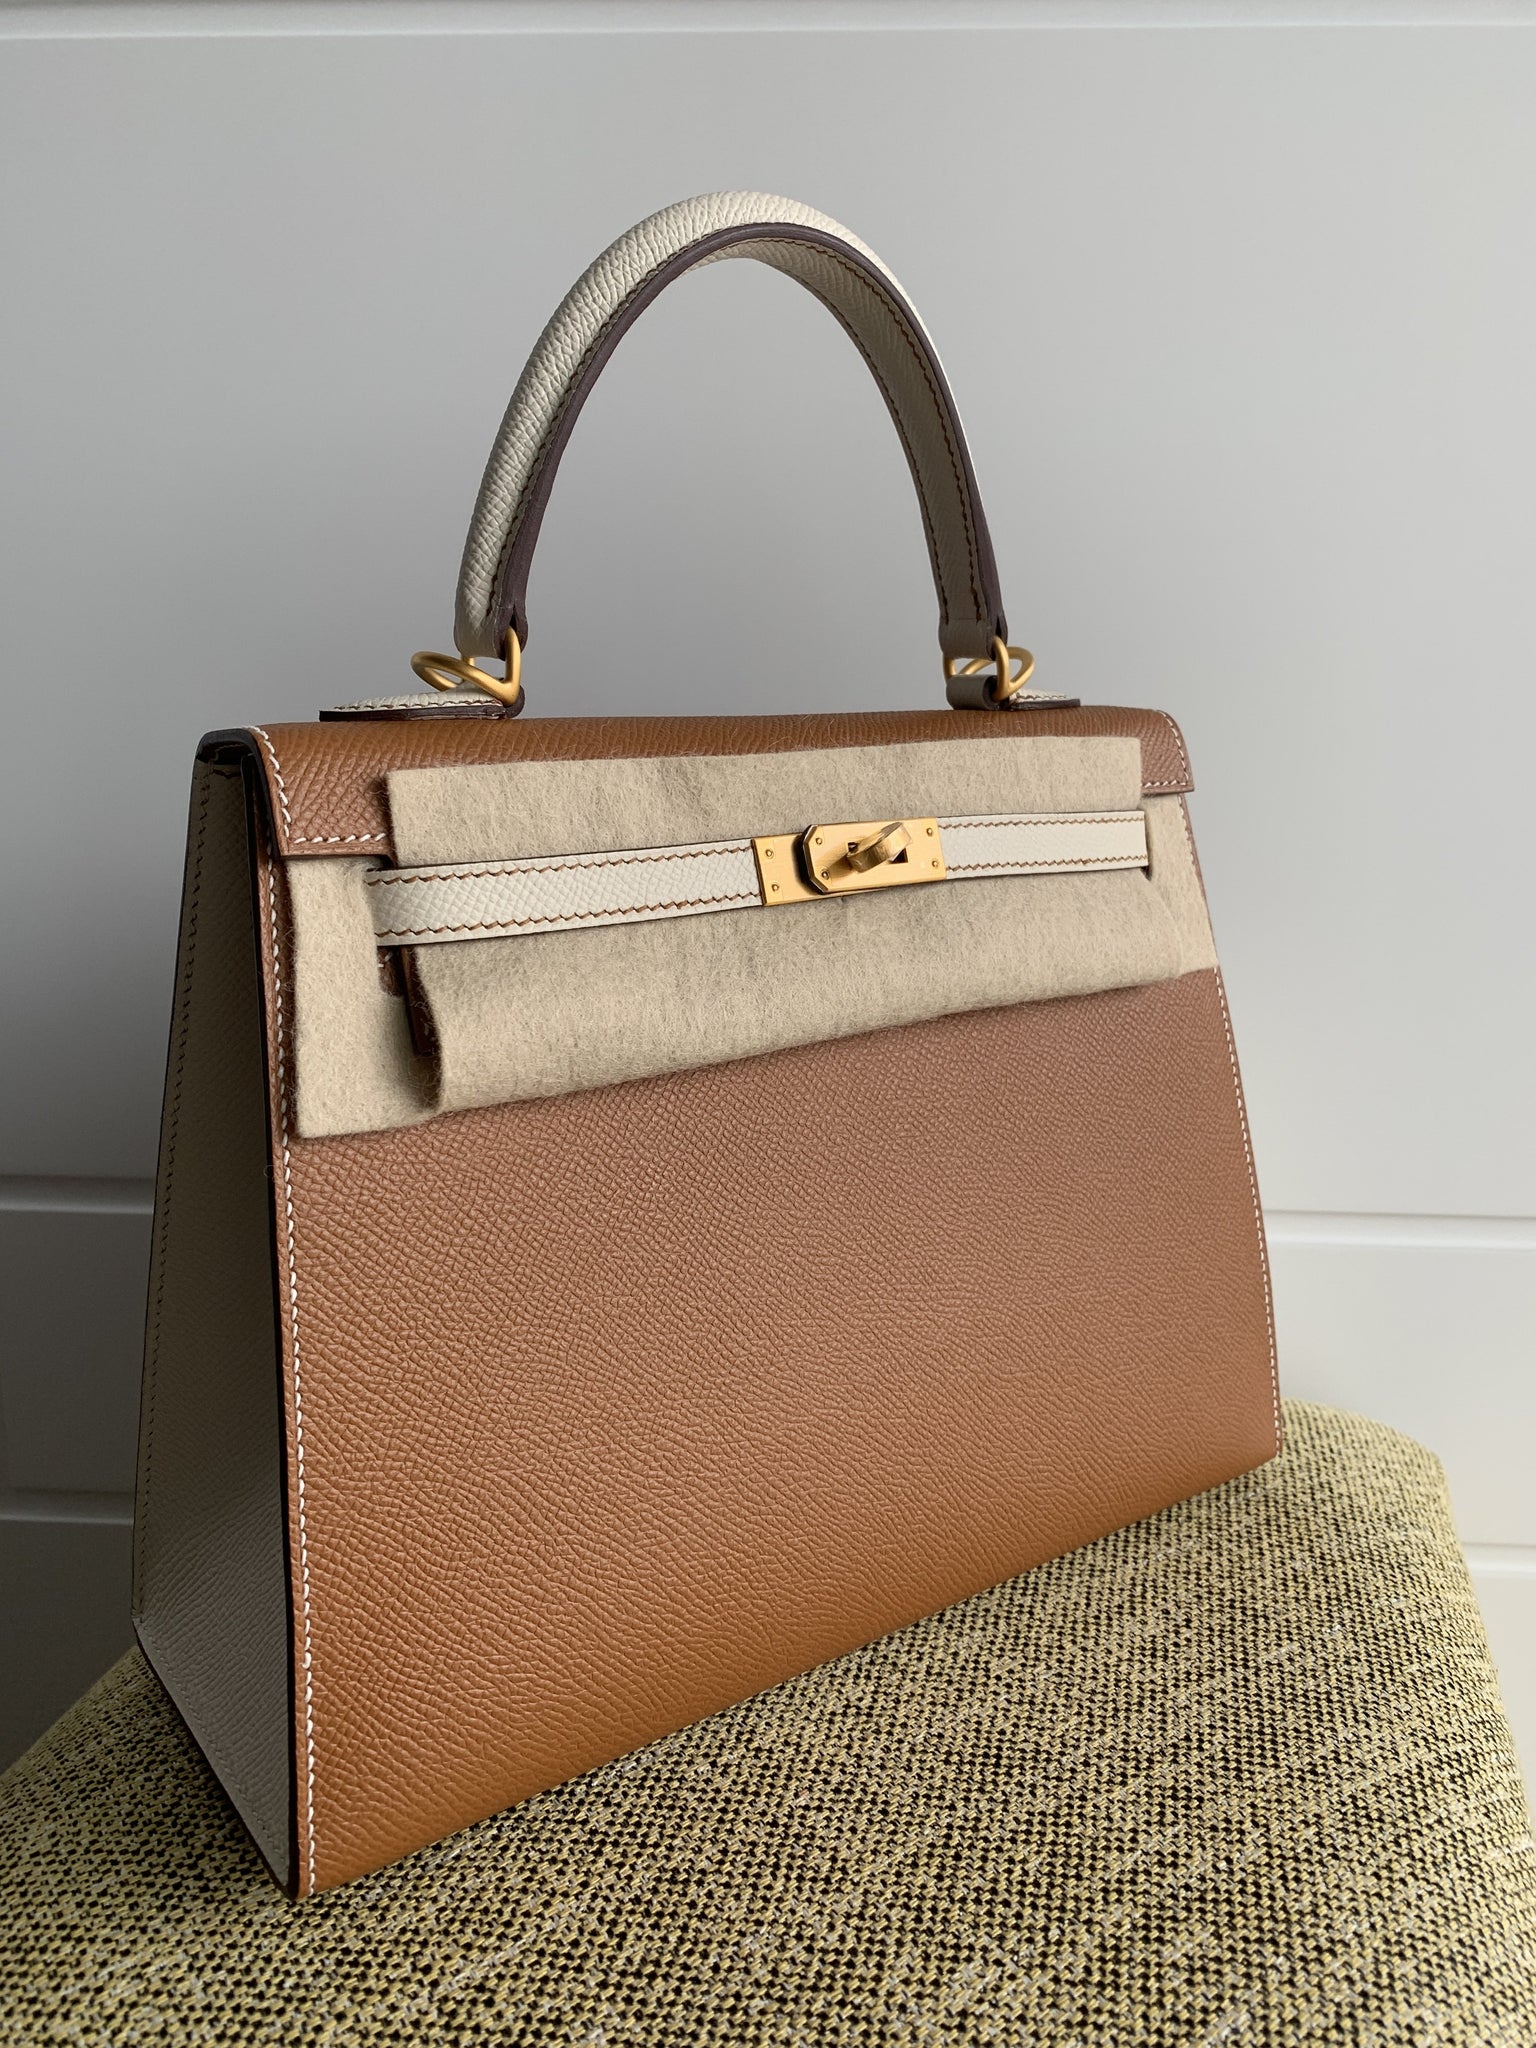 Hermes Kelly 25 Hss Gold With Craie 